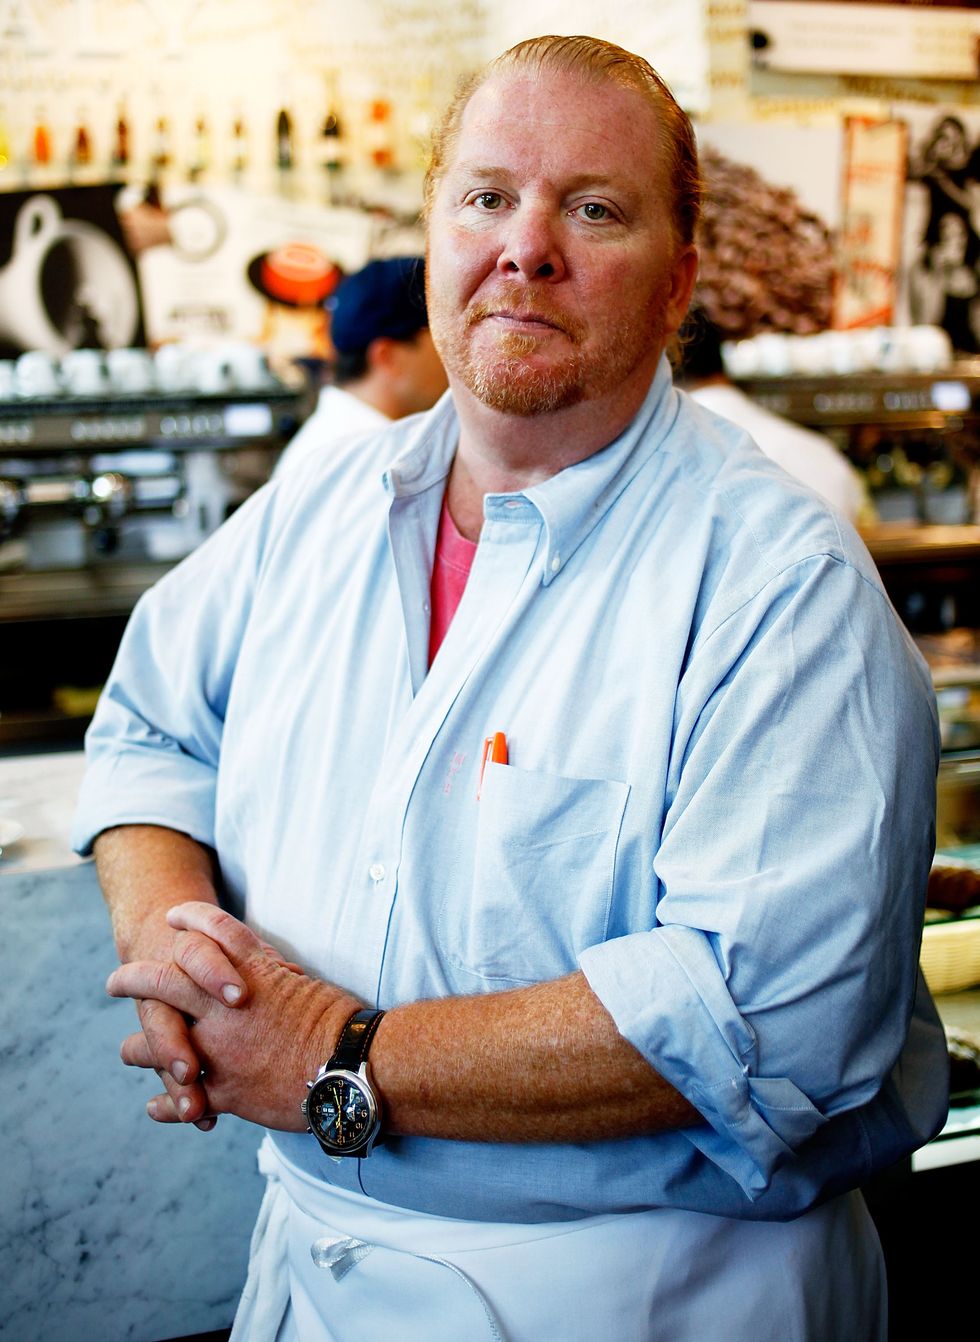 Who Is Mario Batali Chef Accused Of Sexual Harassment 10 Things To Know About Mario Batali 8858